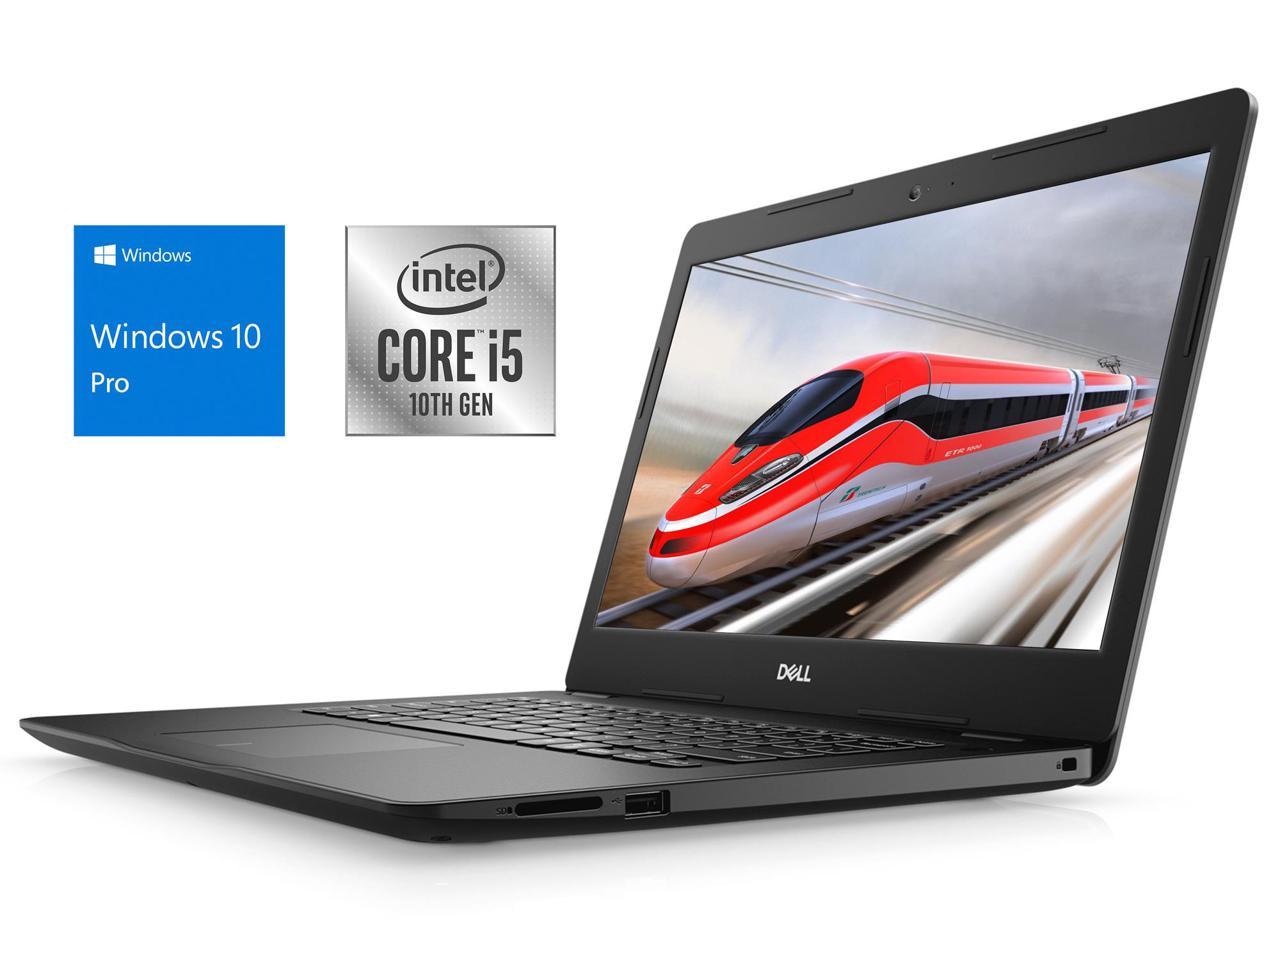 Dell Inspiron 14 3000 Notebook, 14